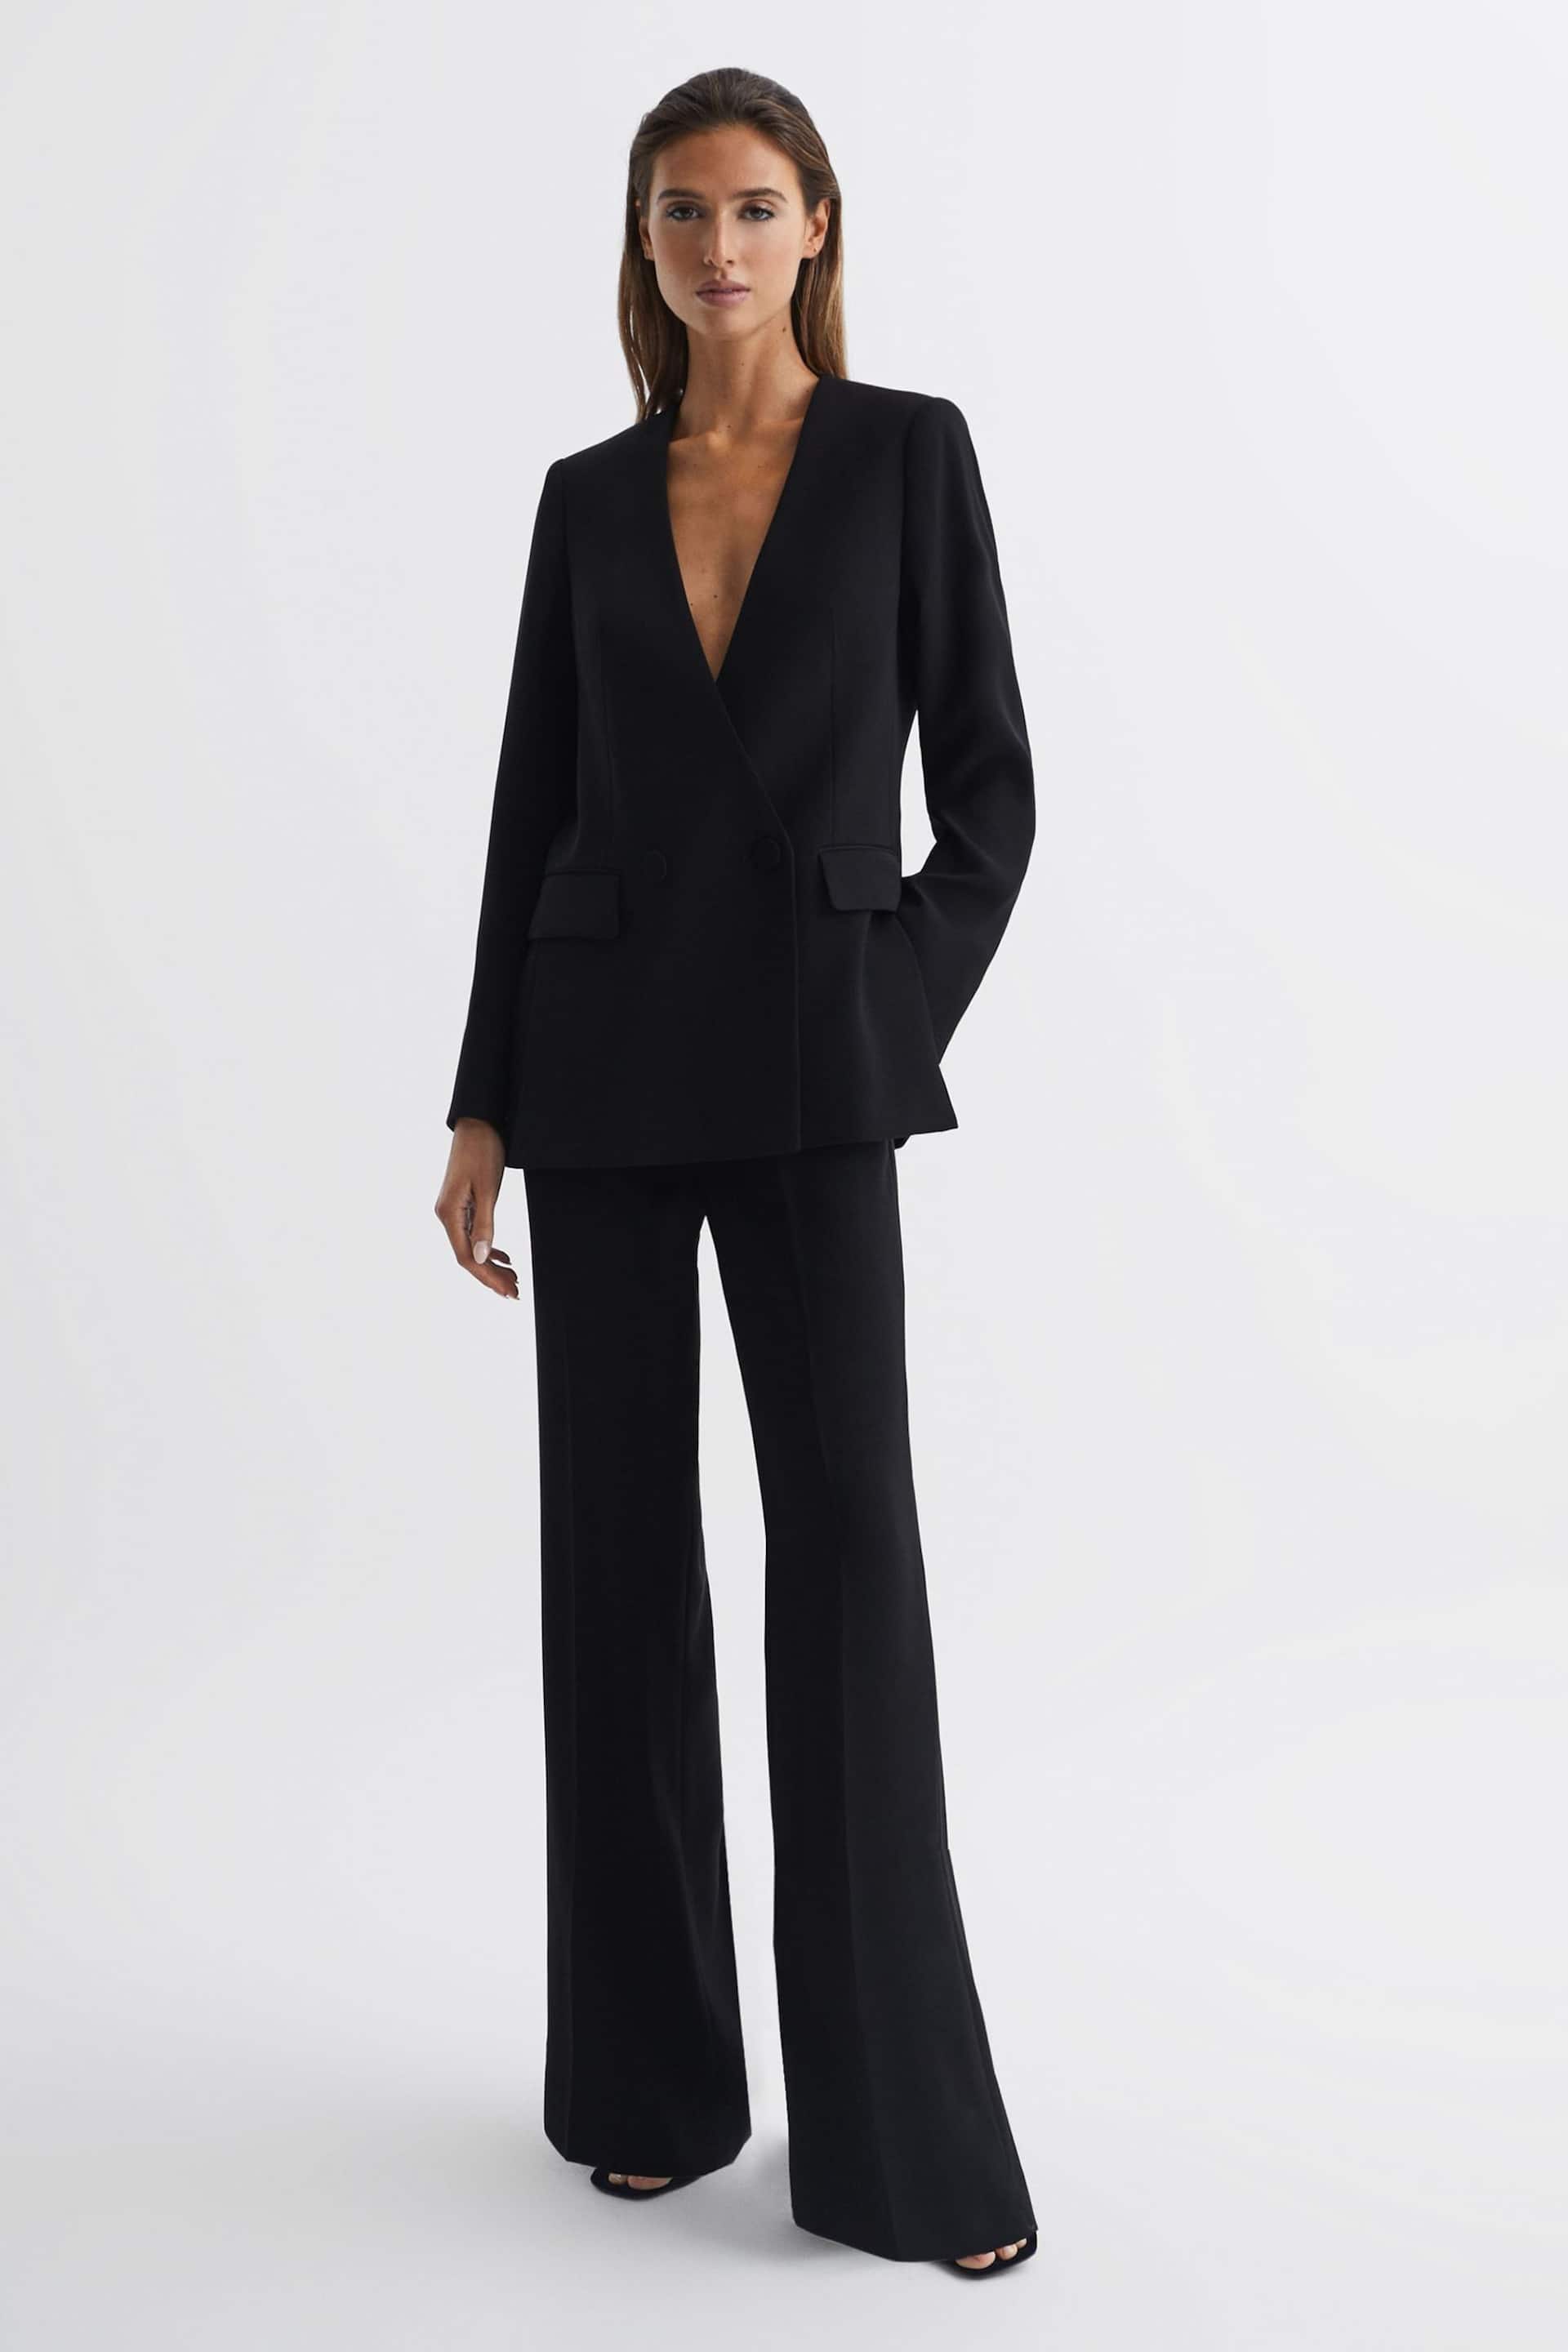 Reiss Black Margeaux Collarless Double Breasted Suit Blazer - Image 3 of 7